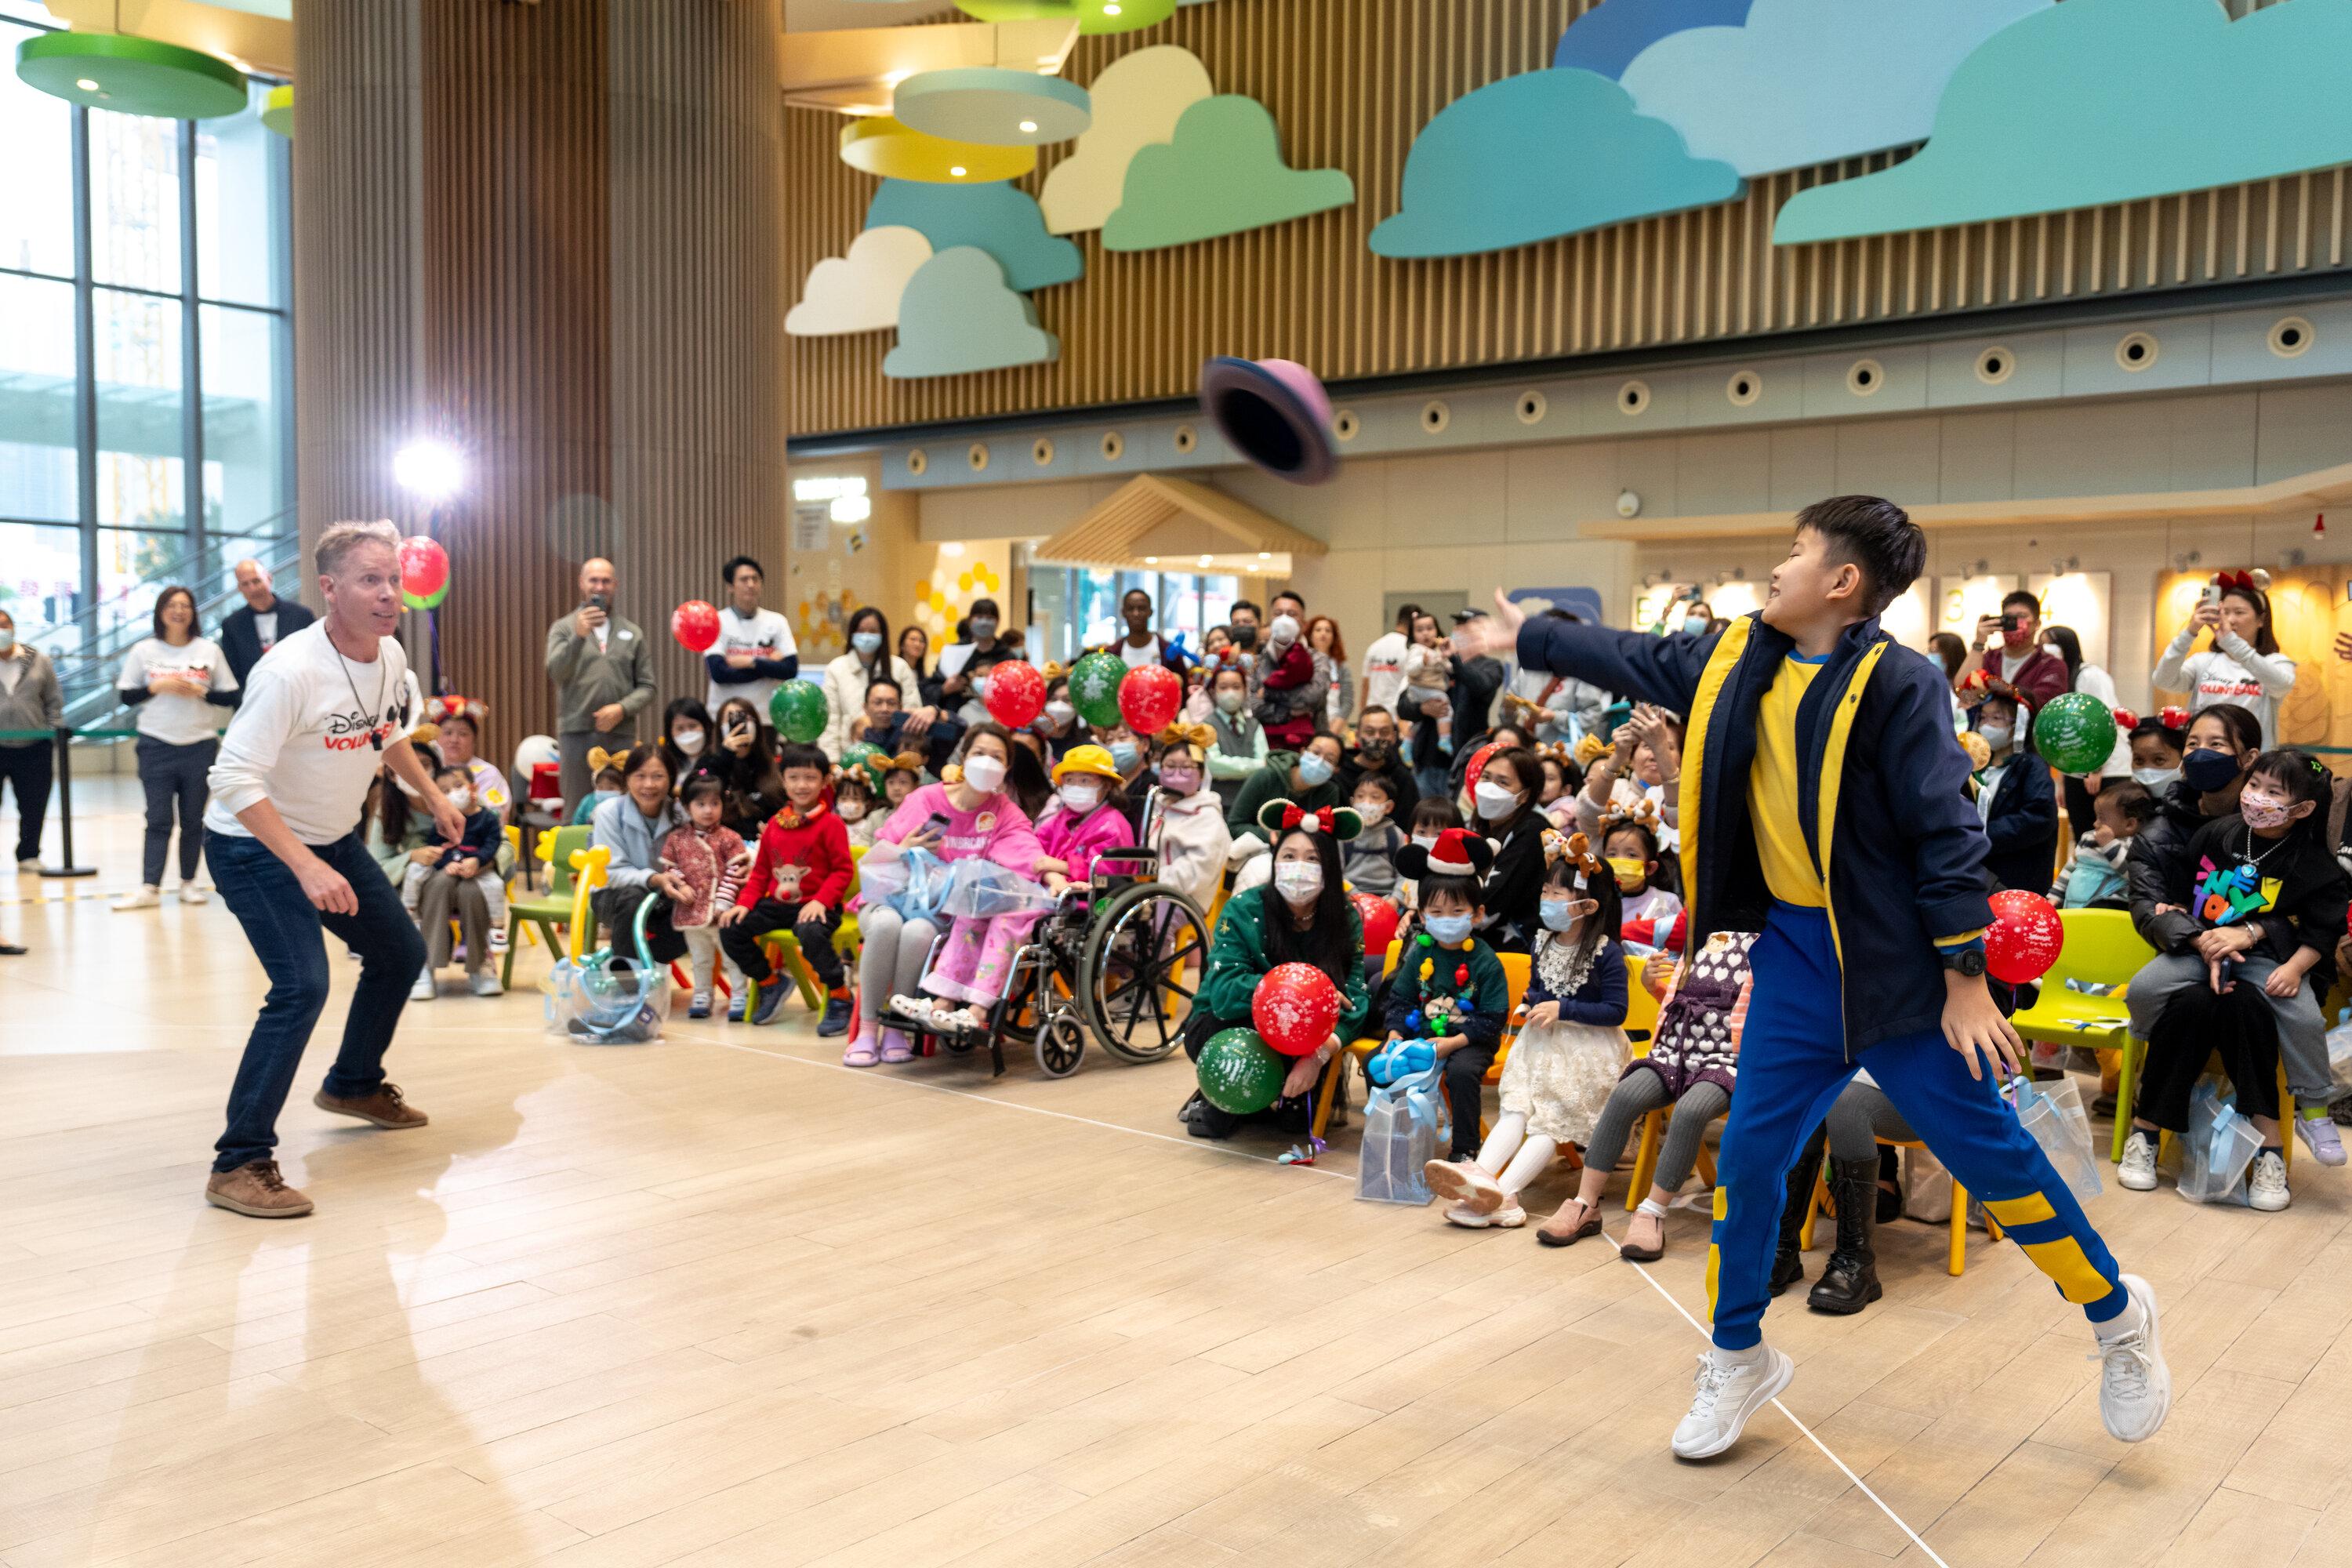 The Hong Kong Children's Hospital collaborated with volunteers from Hong Kong Disneyland to organise a Christmas party for patients and their families at the hospital lobby. Lively dance performances, magic tricks and game booths brought loads of fun to the children.
